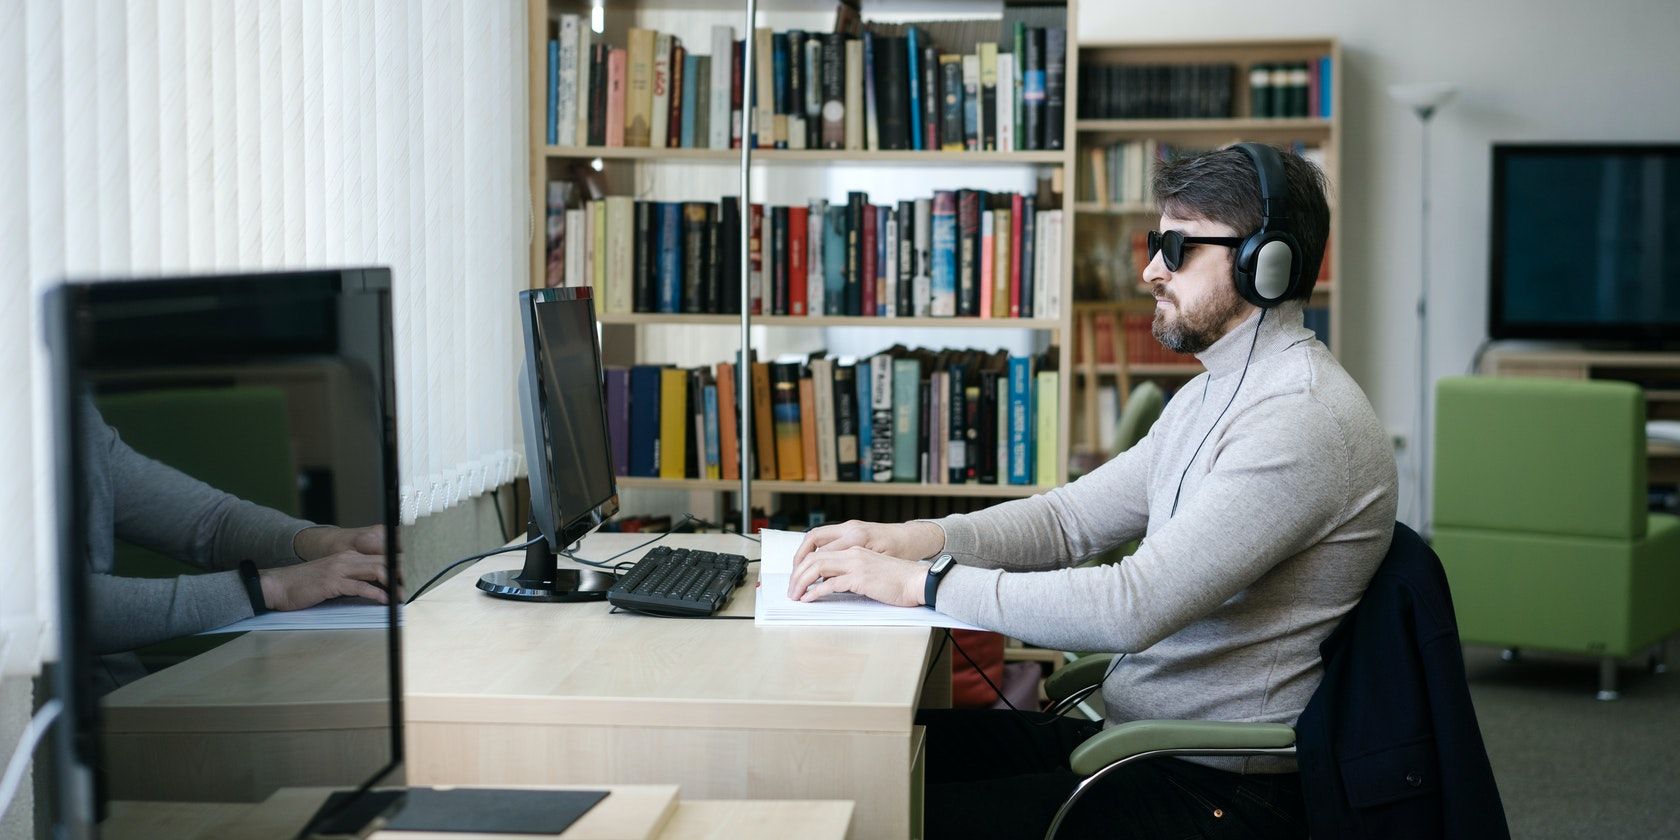 Visually Impaired Person using Braille in front of Computer